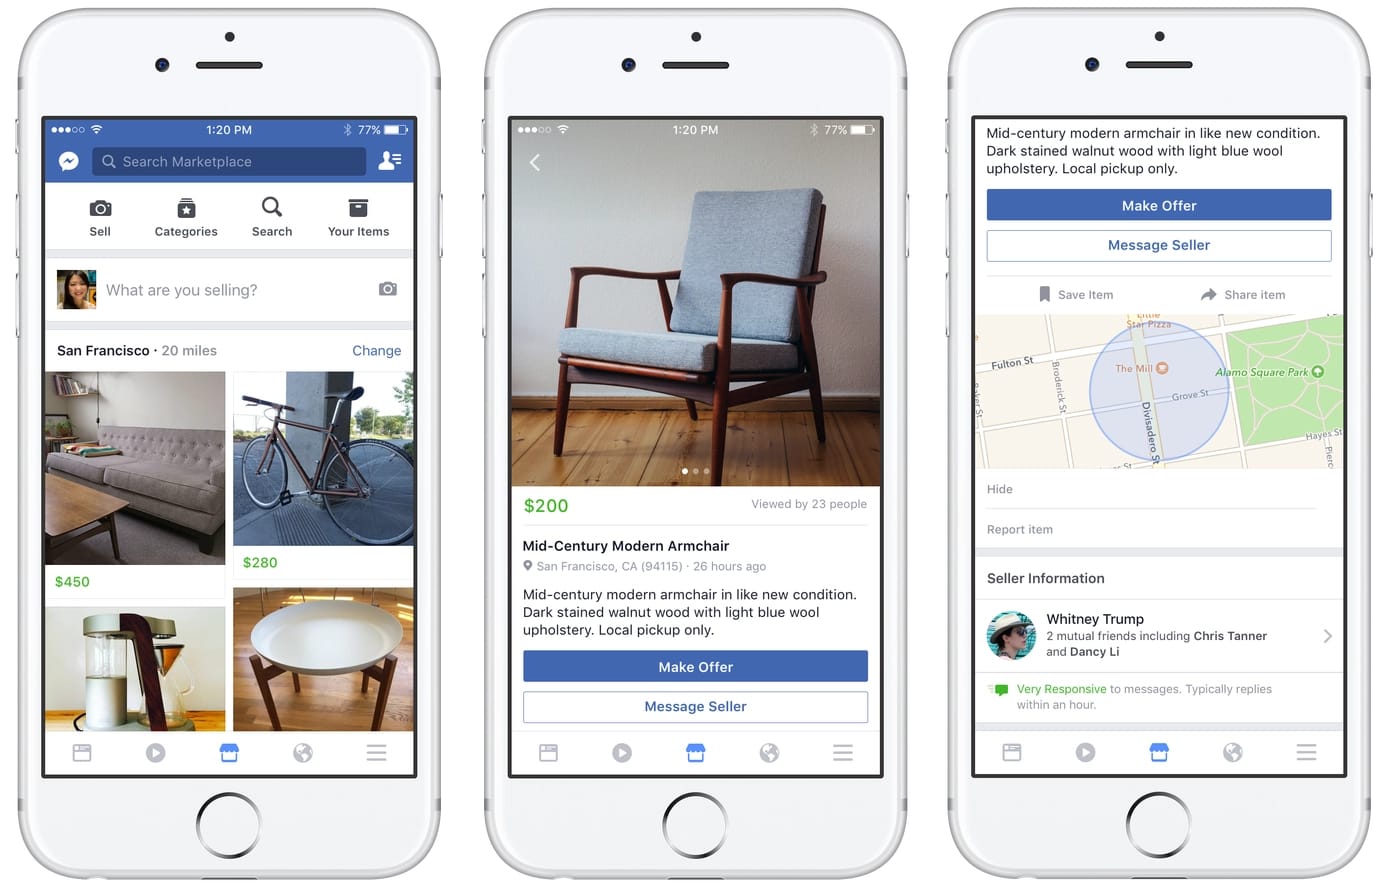 5 reasons you should use Facebook Marketplace instead of Craigslist - CNET